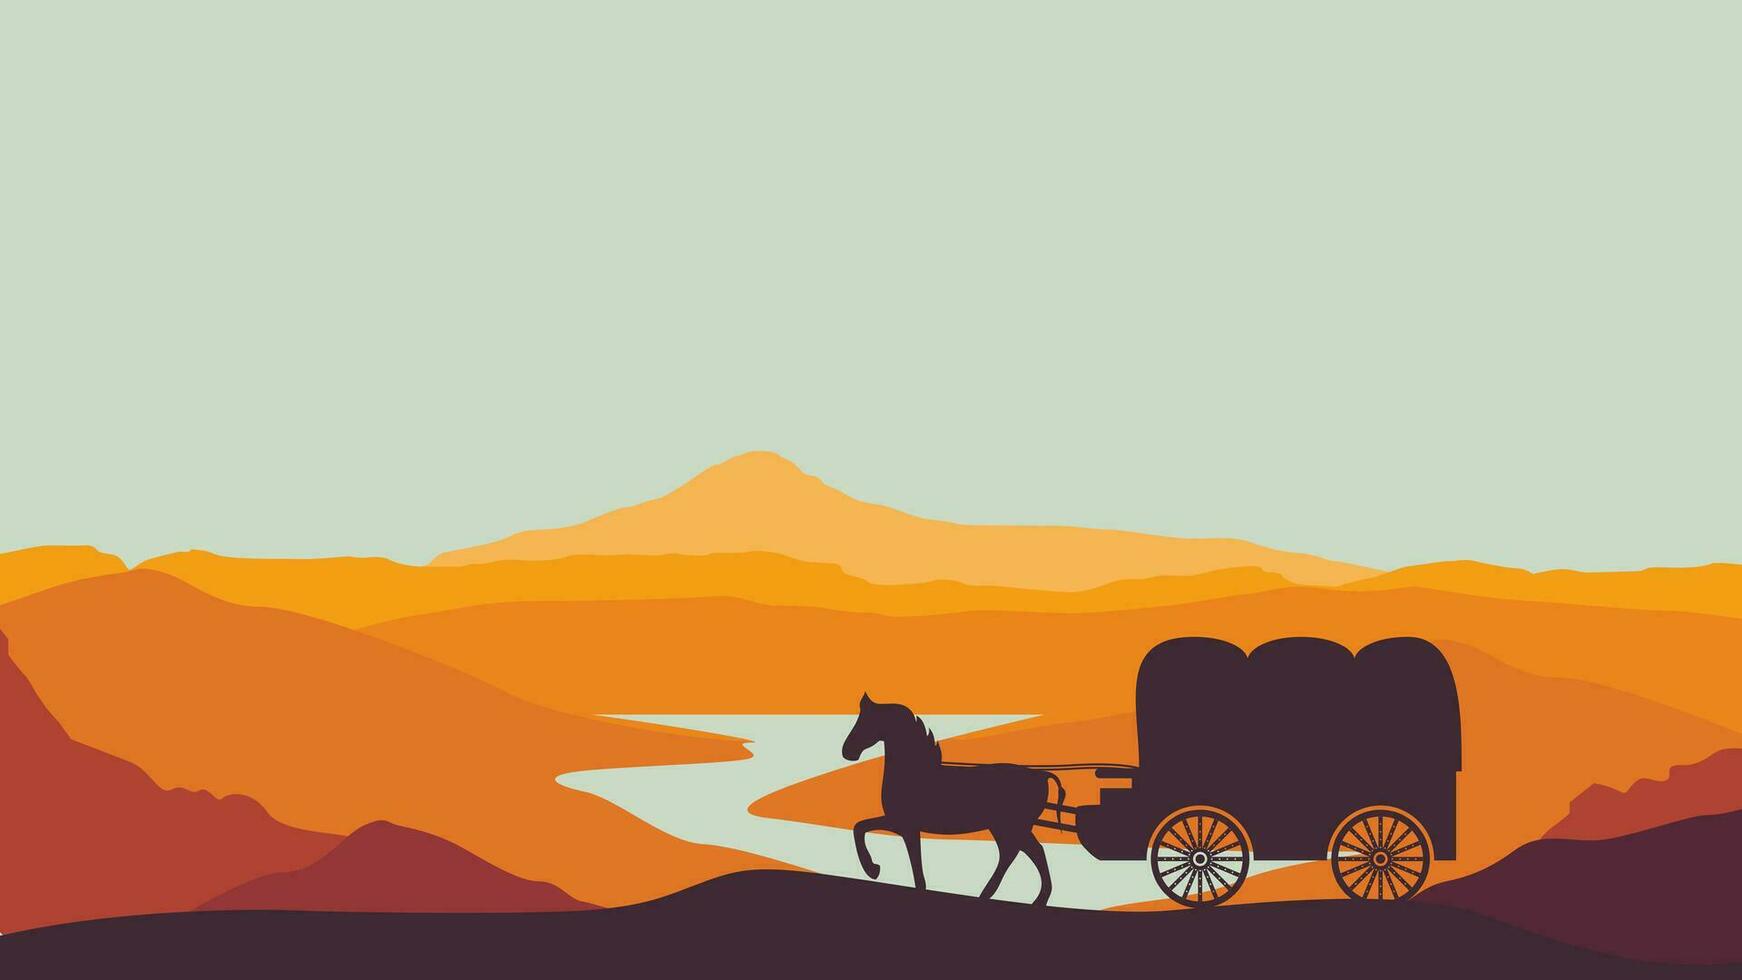 pioneer day background illustration with west american emigrant wagon vector